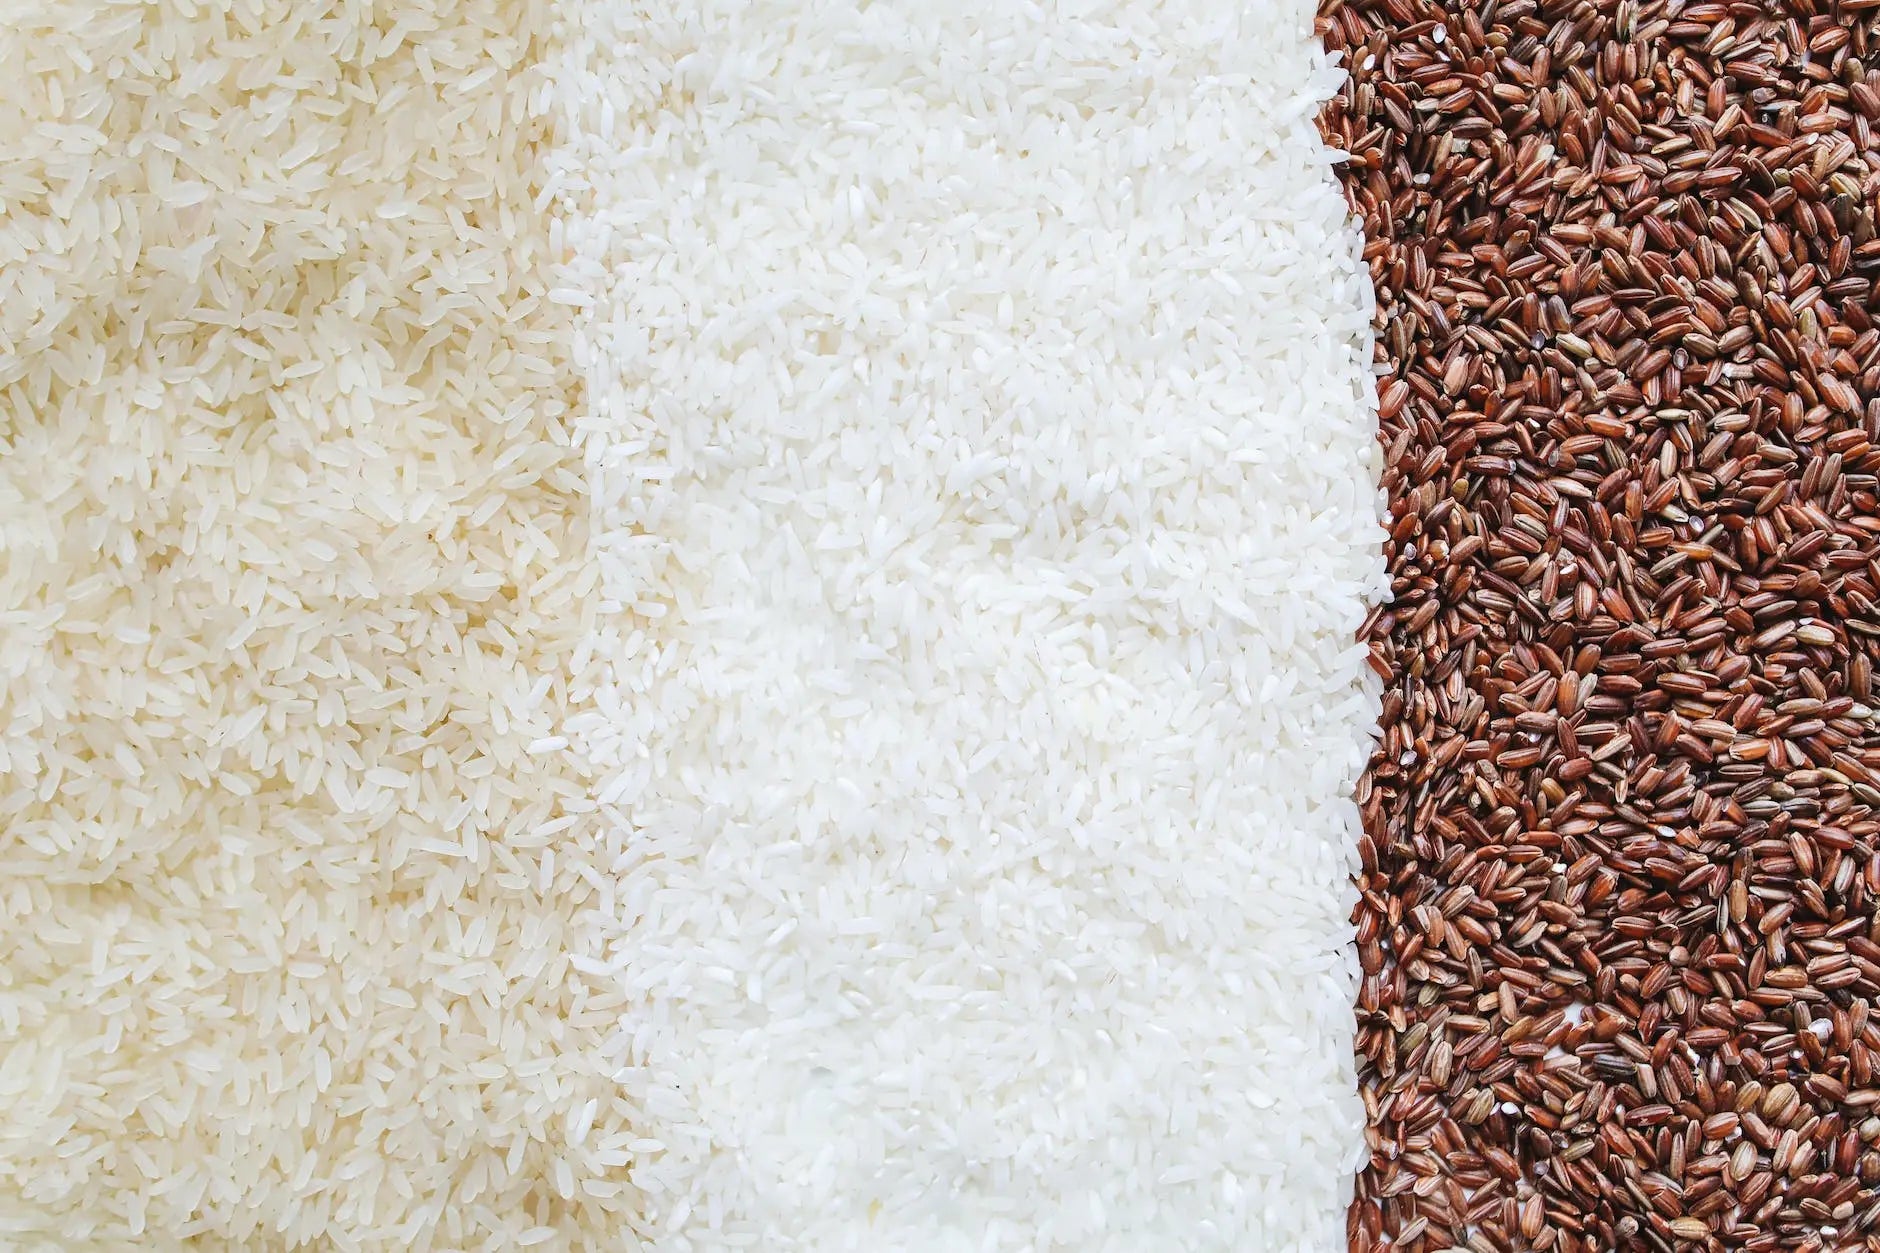 Keep-it-Fresh-The-Ultimate-Guide-to-Storing-Cooked-Rice-in-the-Fridge | Fridge.com